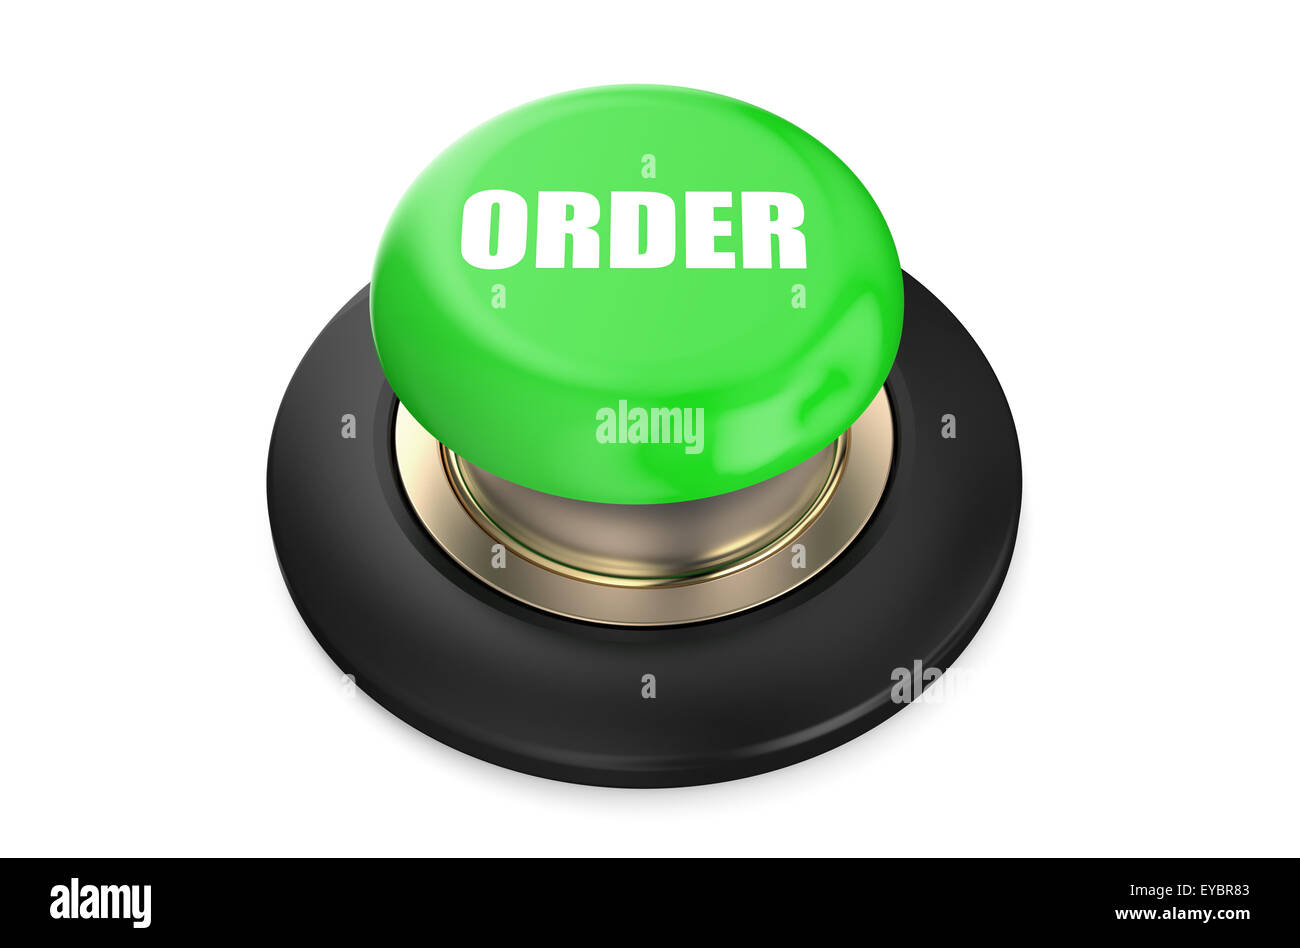 Order Green button isolated on white background Stock Photo